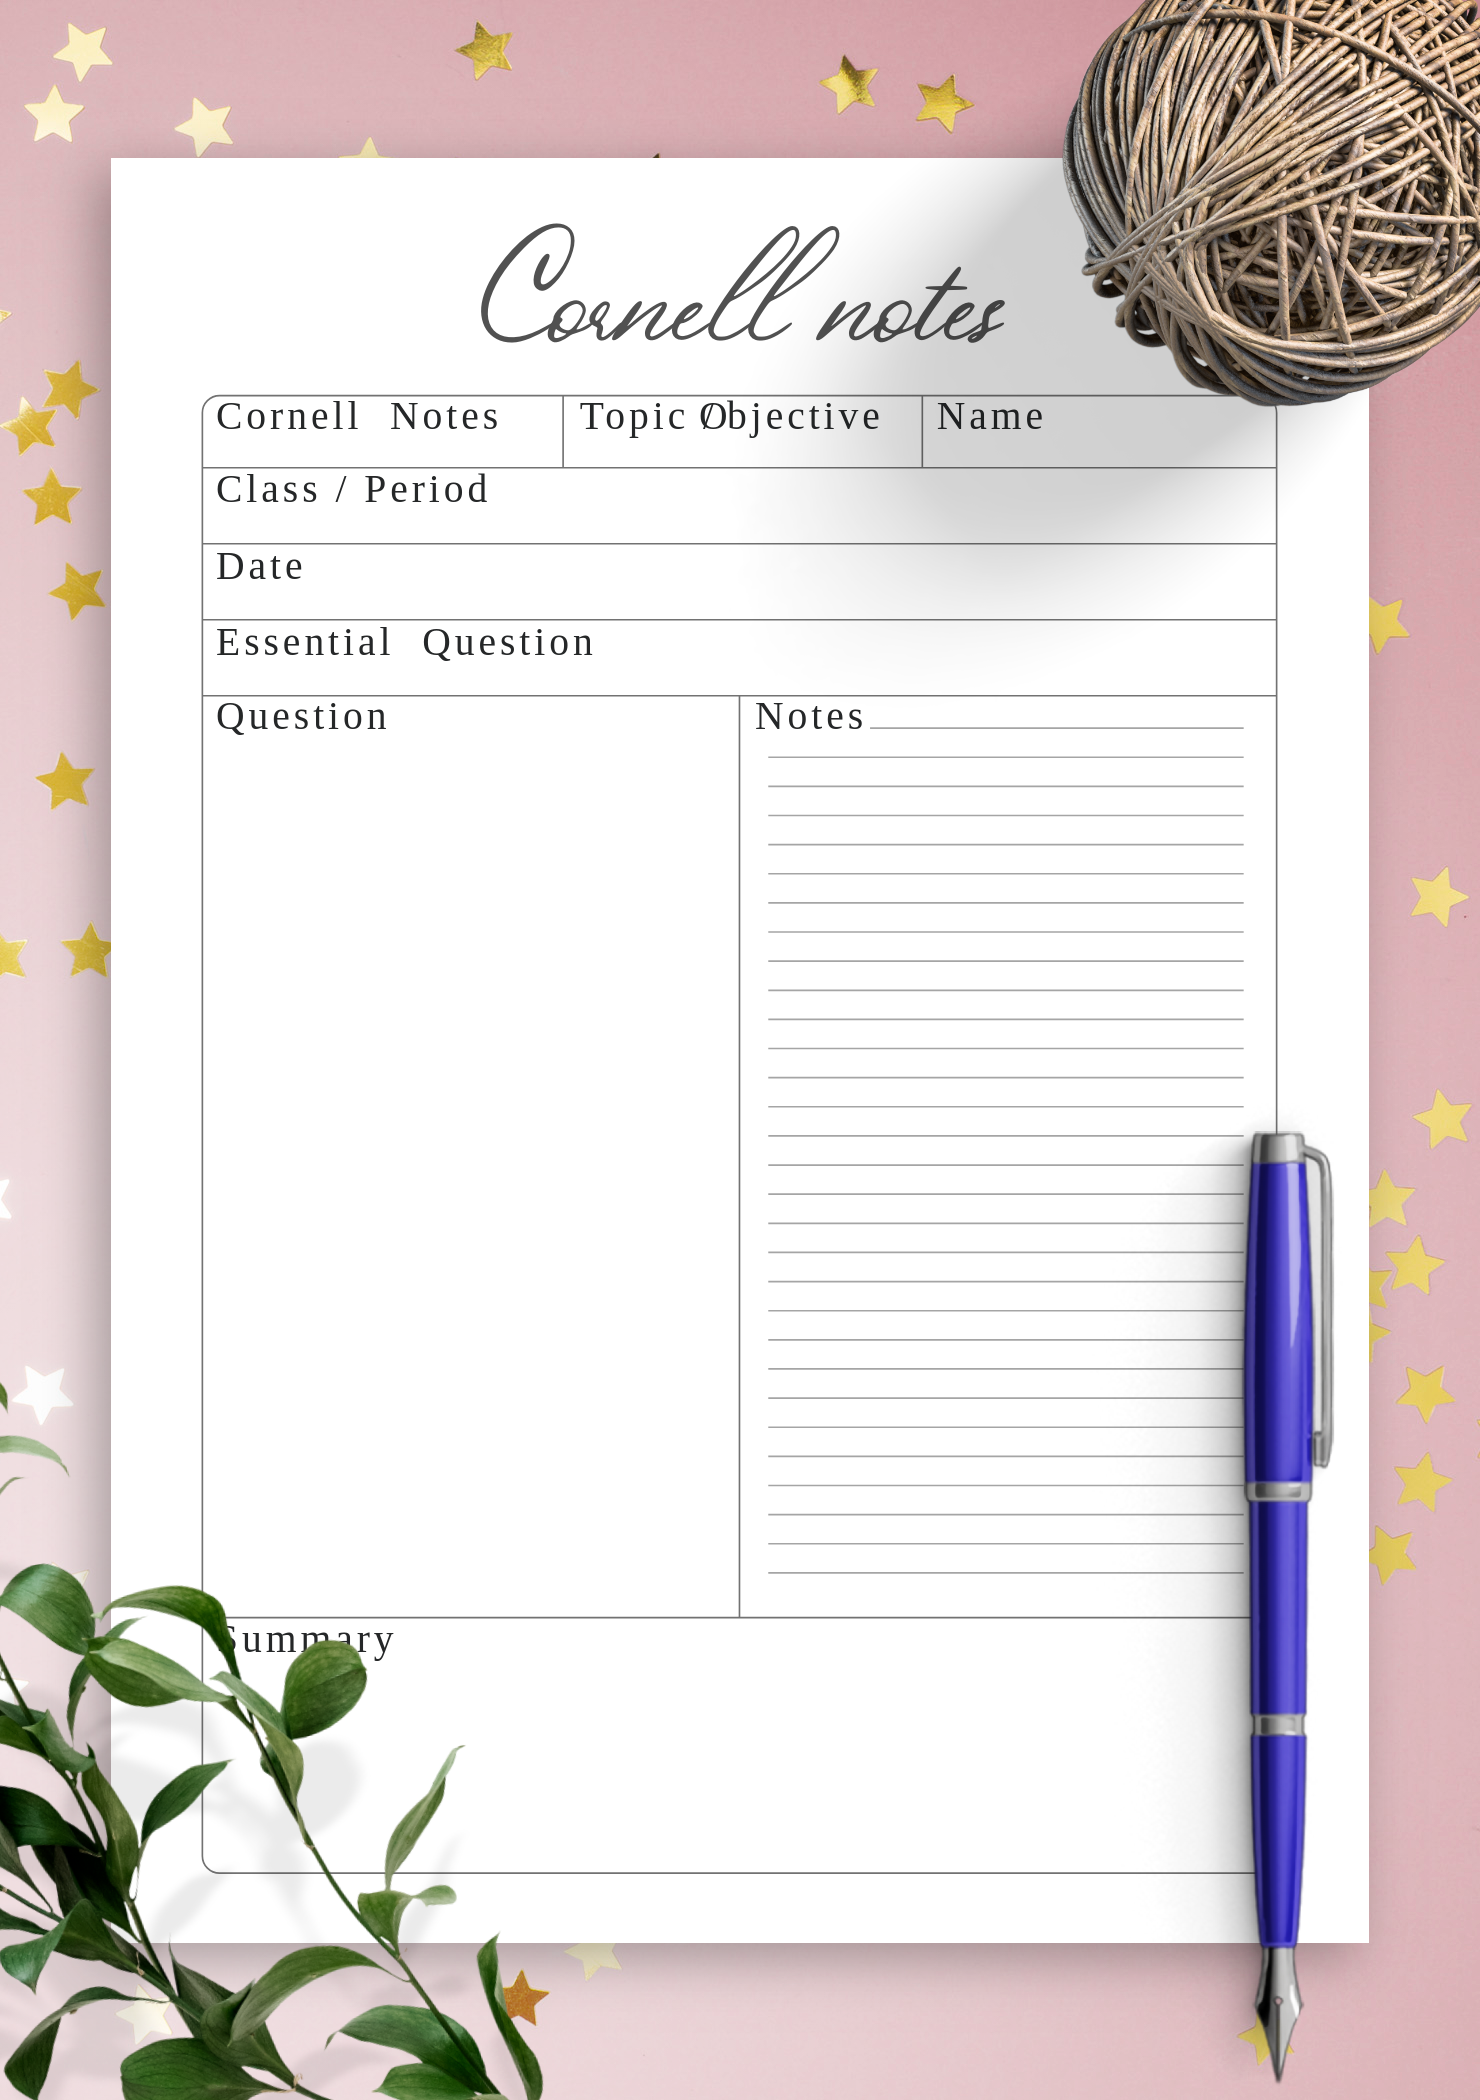 Note Taking Sheets Printable